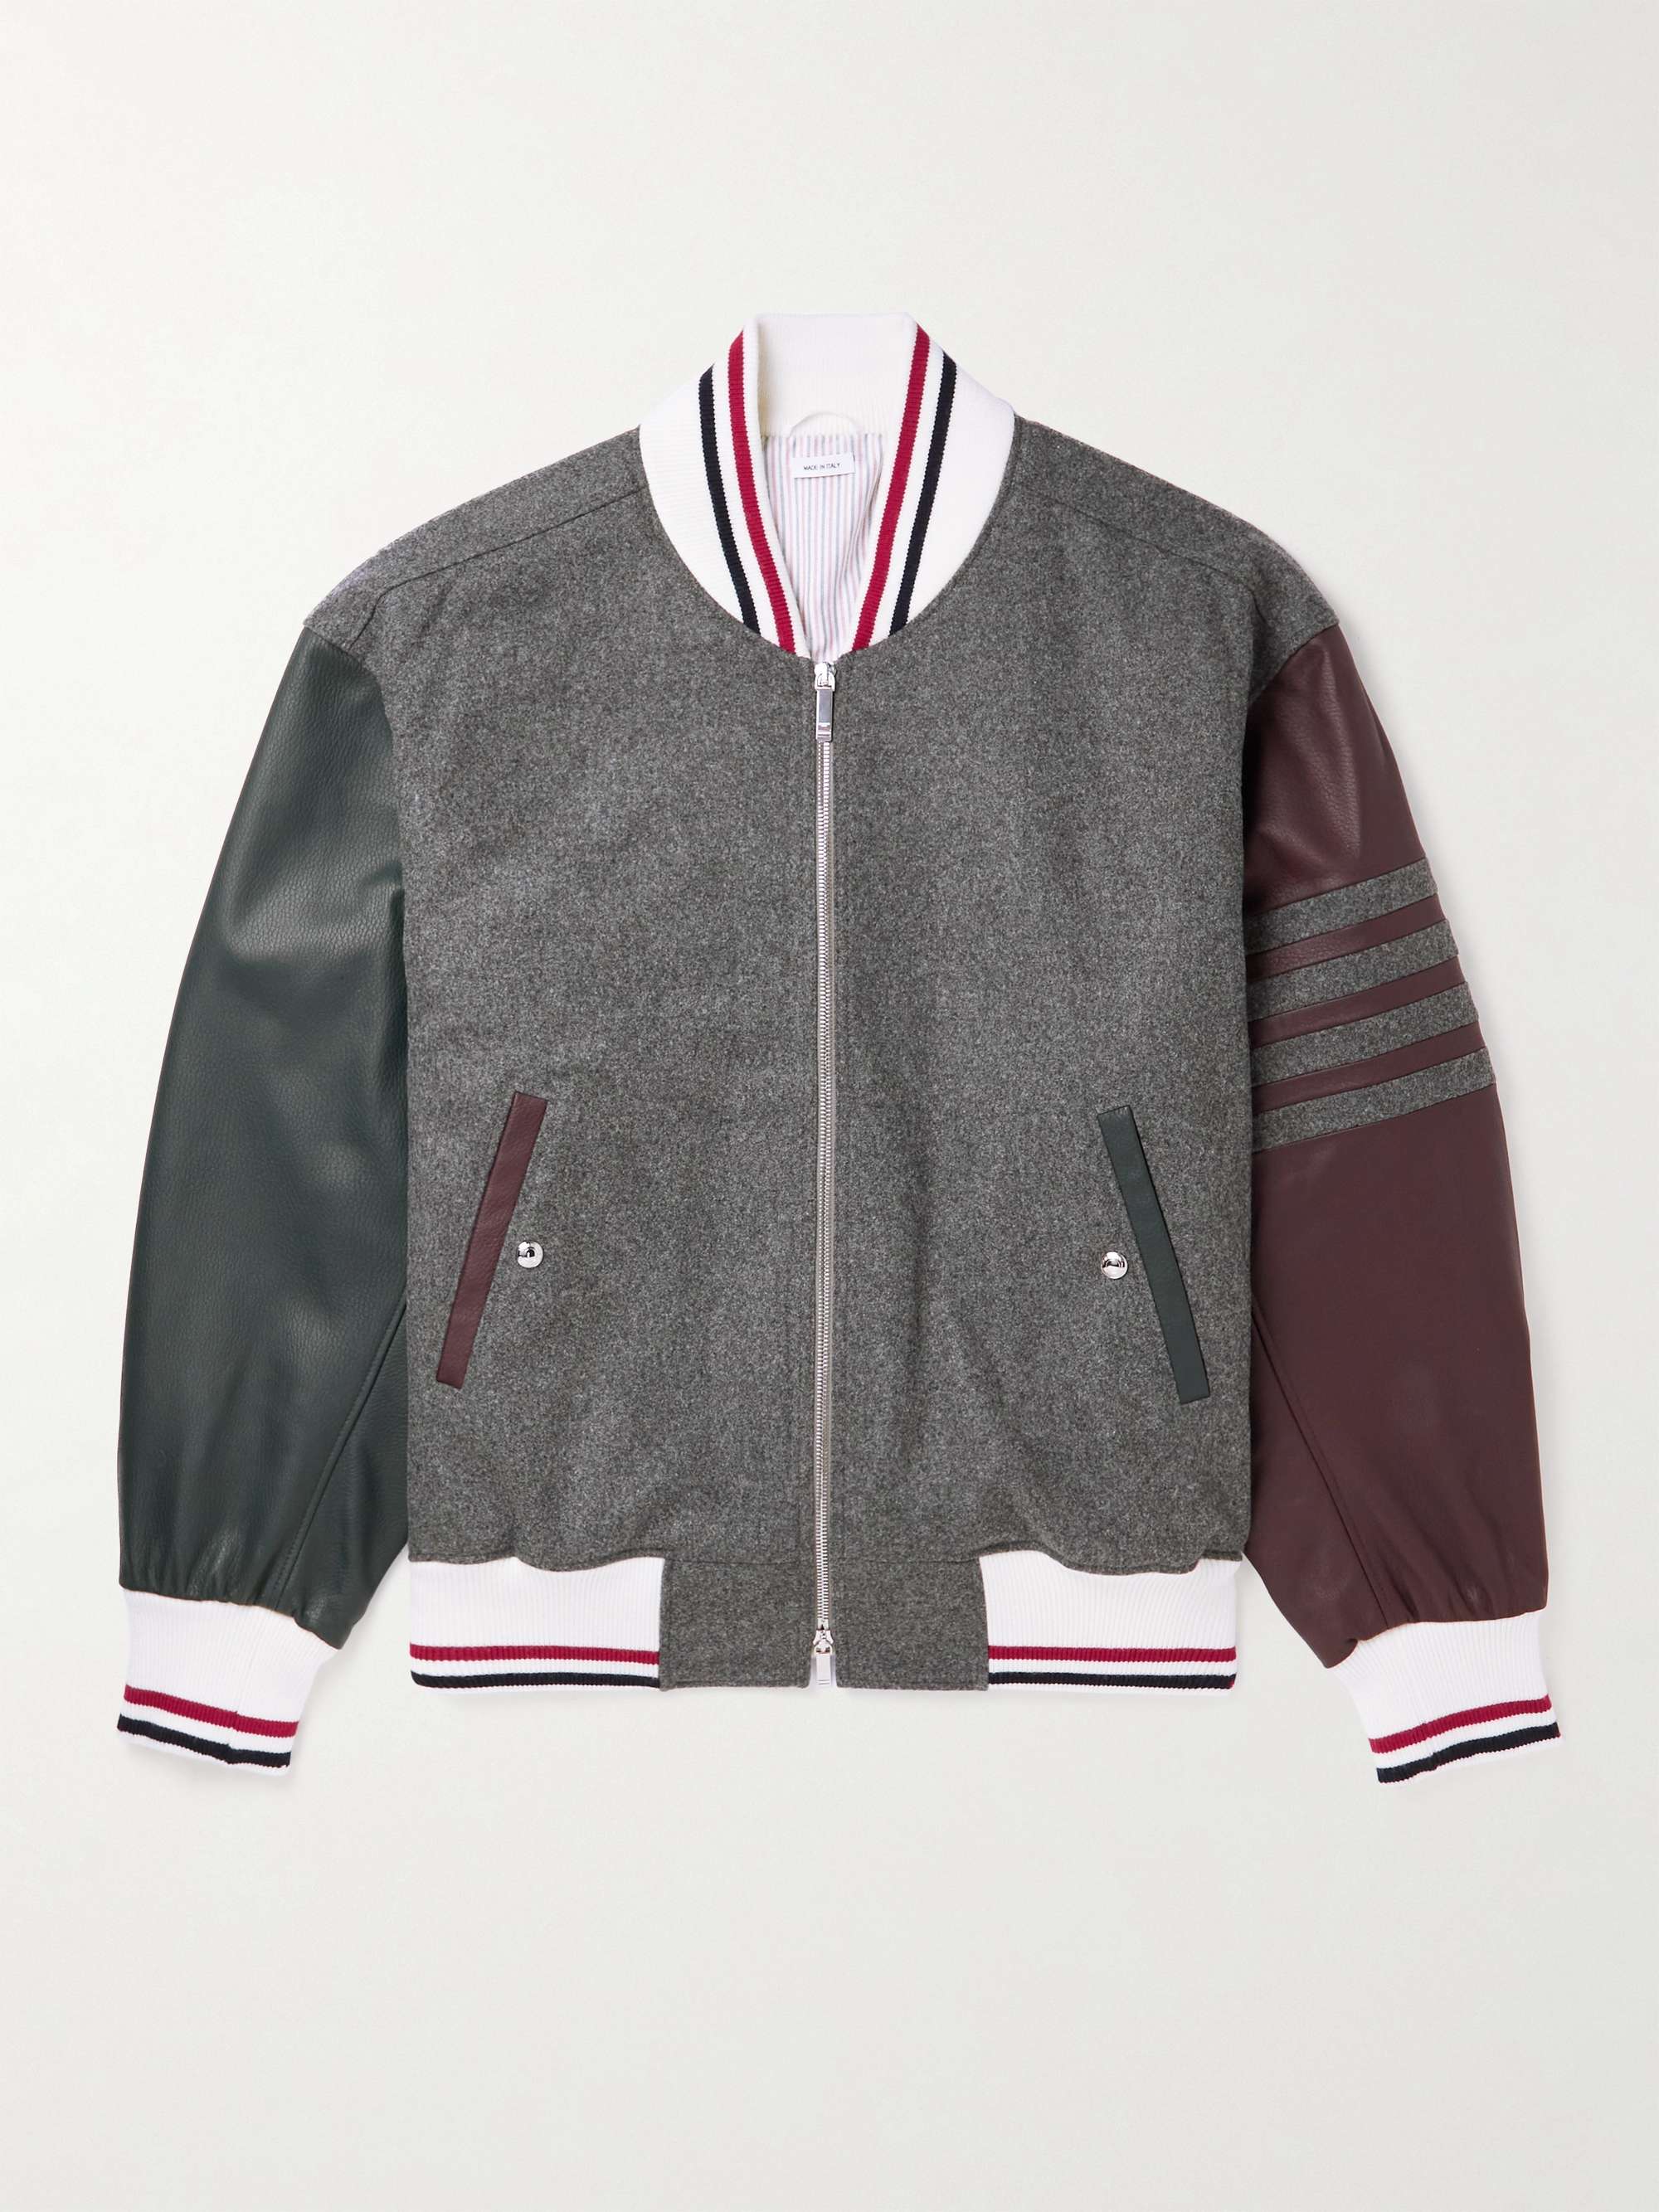 THOM BROWNE Leather-Trimmed Merino Wool Bomber Jacket